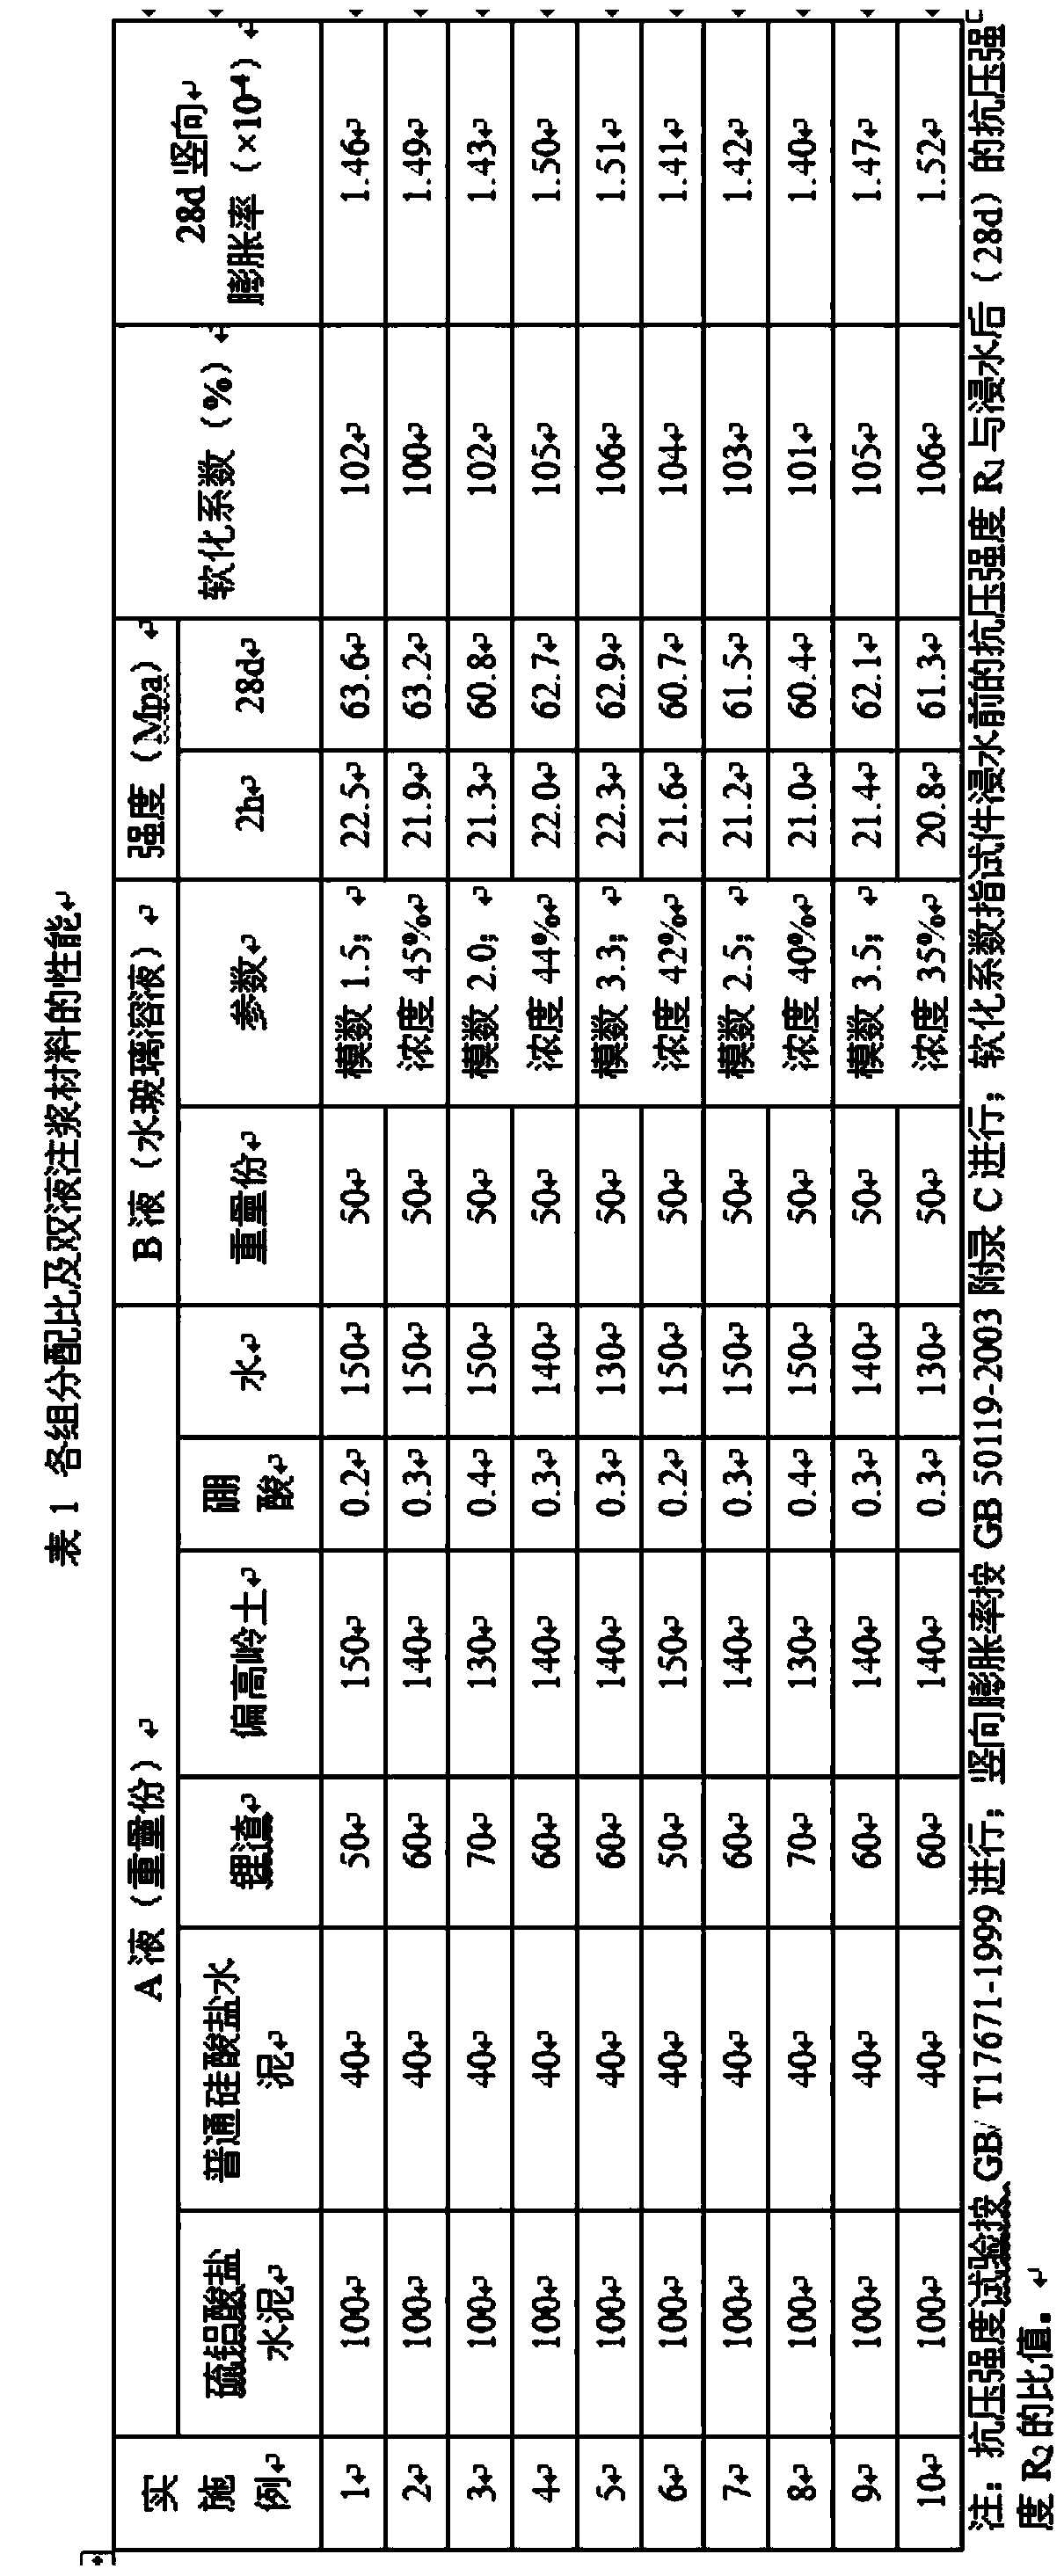 Super-high early-strength micro-expansive double liquid grouting material and preparation method of same